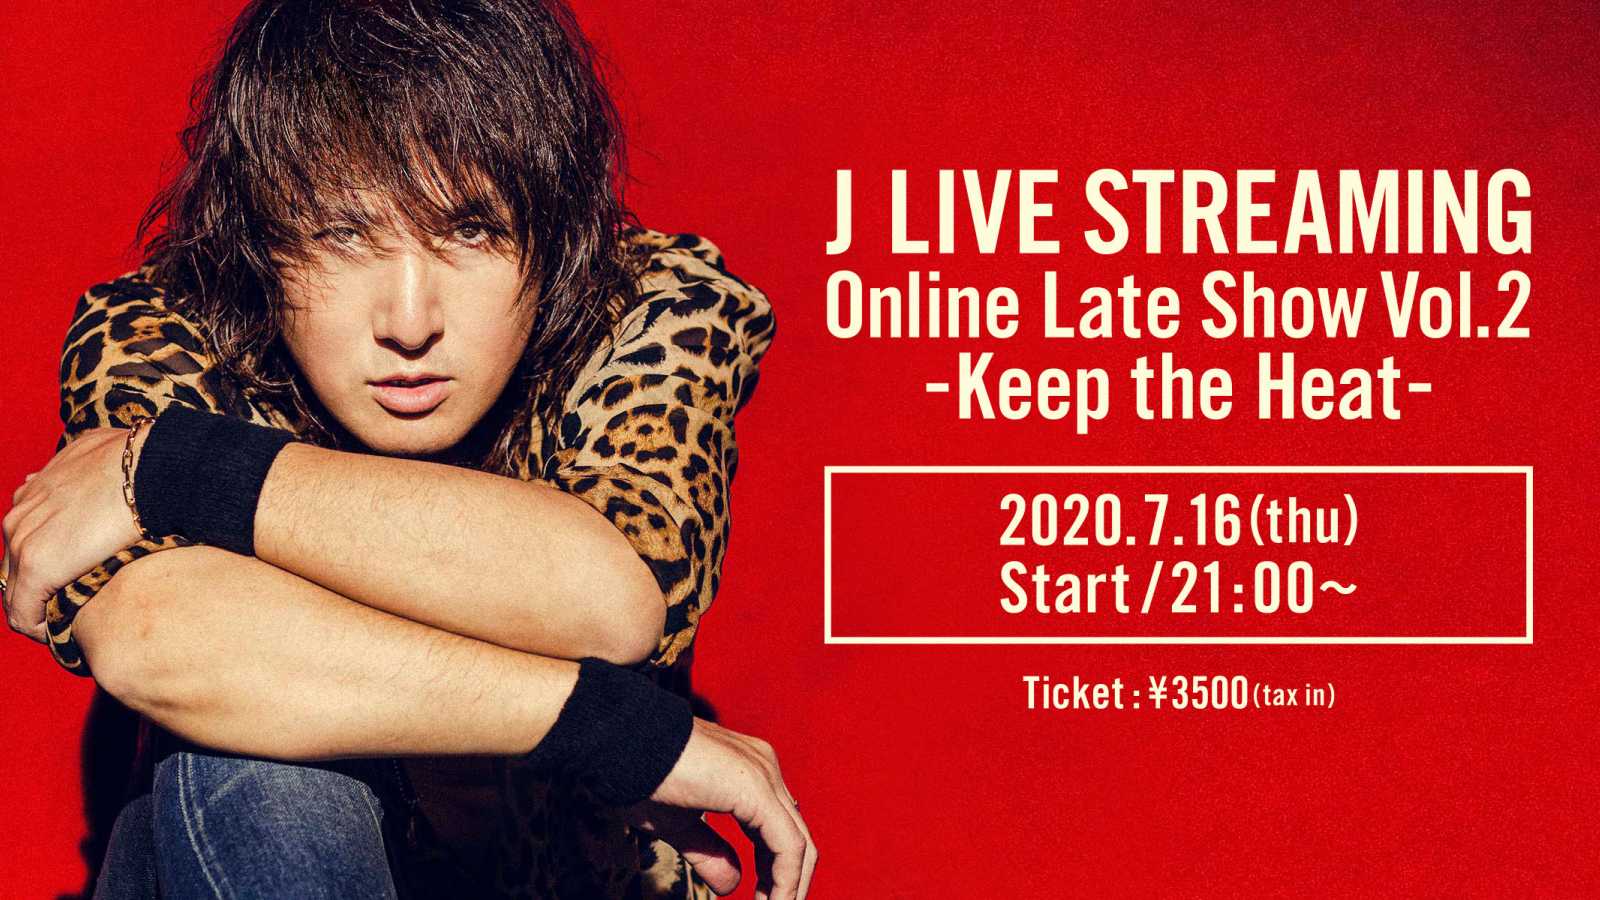 J to Stream Online Late Show Vol.2 on niconico LiVE © J. All rights reserved.